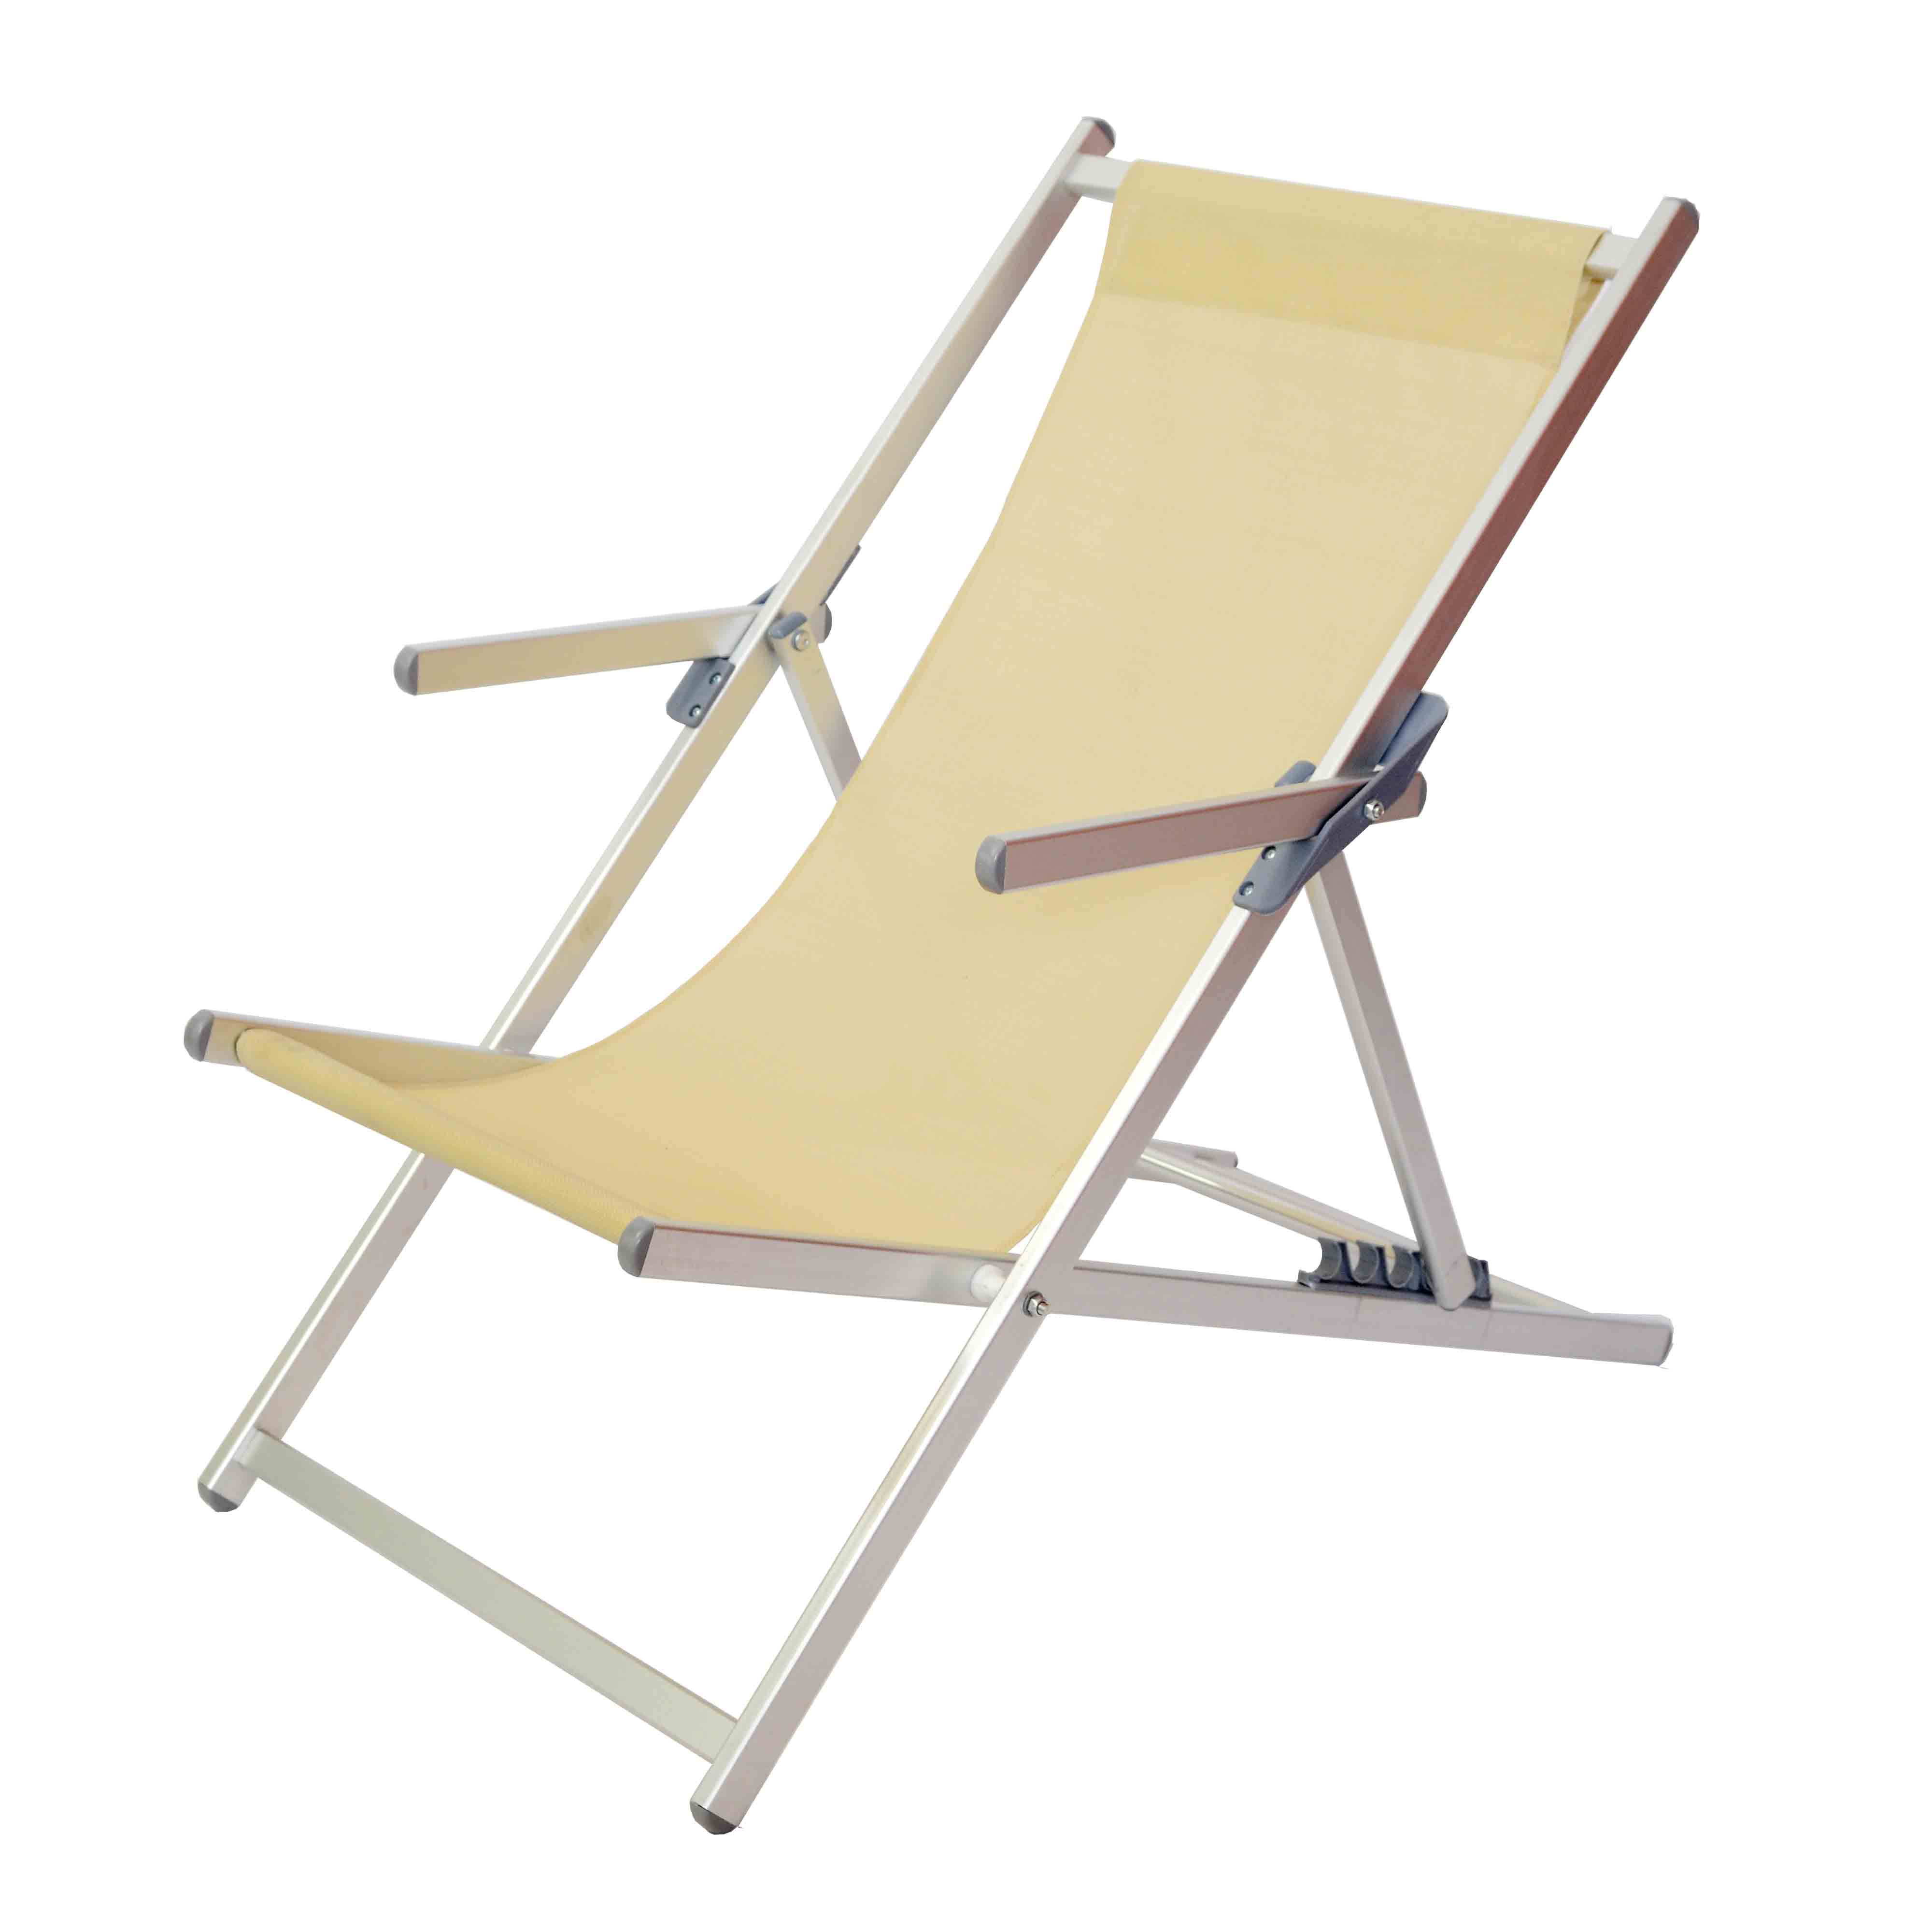 One of Hottest for Cheap Outdoor Furniture Sets - JJLXS-036 Aluminum camping folding chair – Jin-jiang Industry